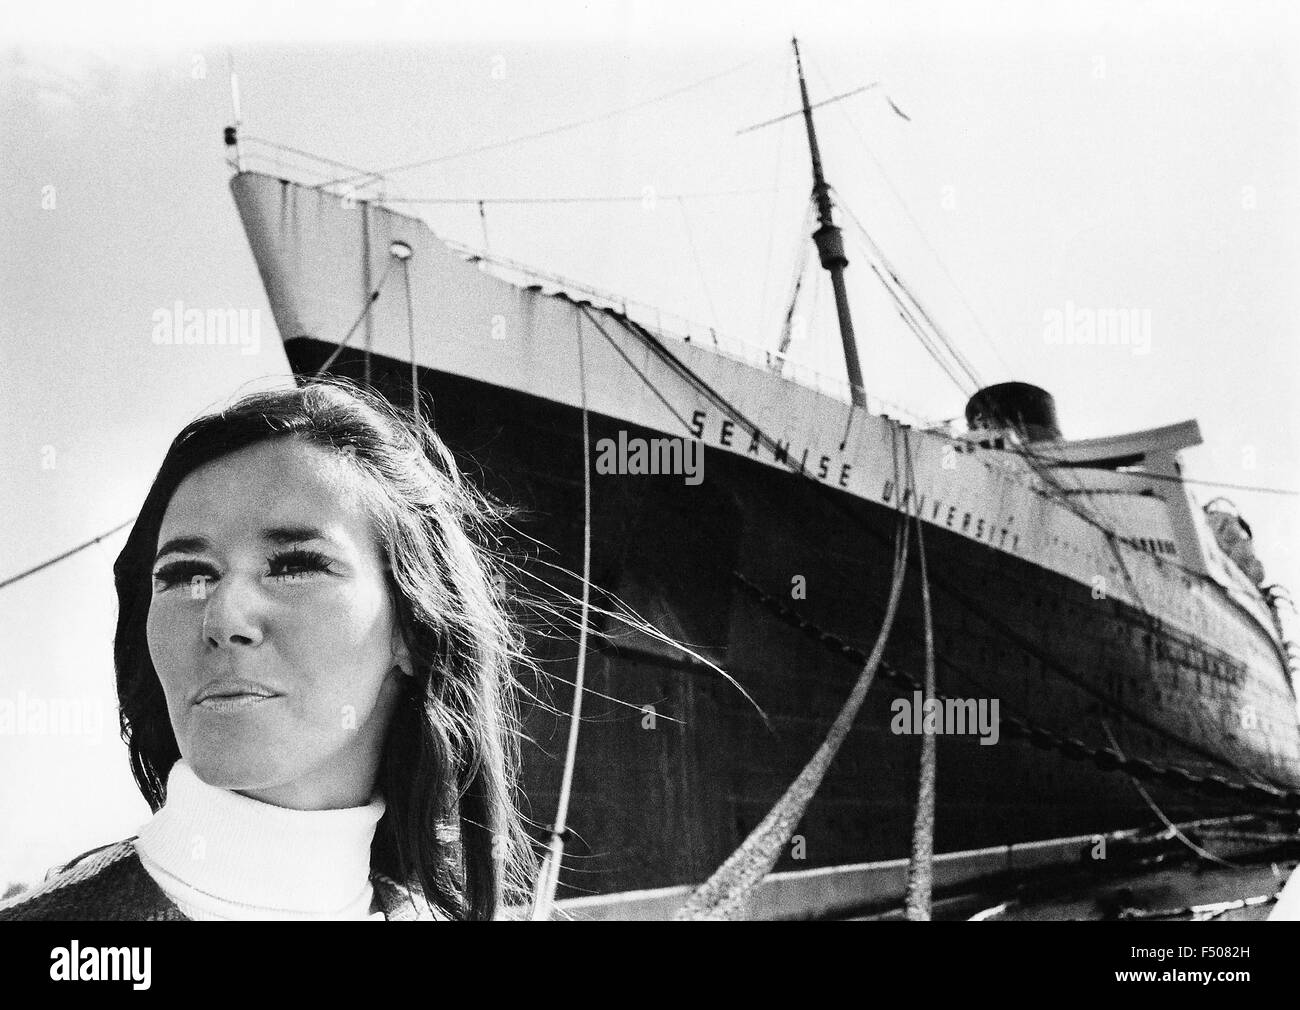 A prospective female student poses in front of Seawise University, the former RMS Queen Elizabeth, while it was docked in 1971 at Port Everglades, Florida, USA. Once the world's largest passenger ship, it was intended to become a floating school that sailed the globe. However, a year later the ocean liner caught fire and sank in Hong Kong's Victoria Harbor while it was being refurbished as a floating campus for students. Parts of the 83,000-ton vessel that were not salvaged became a navigational hazard in the harbor until being buried with landfill in the late 1990s. Historical photo. Stock Photo